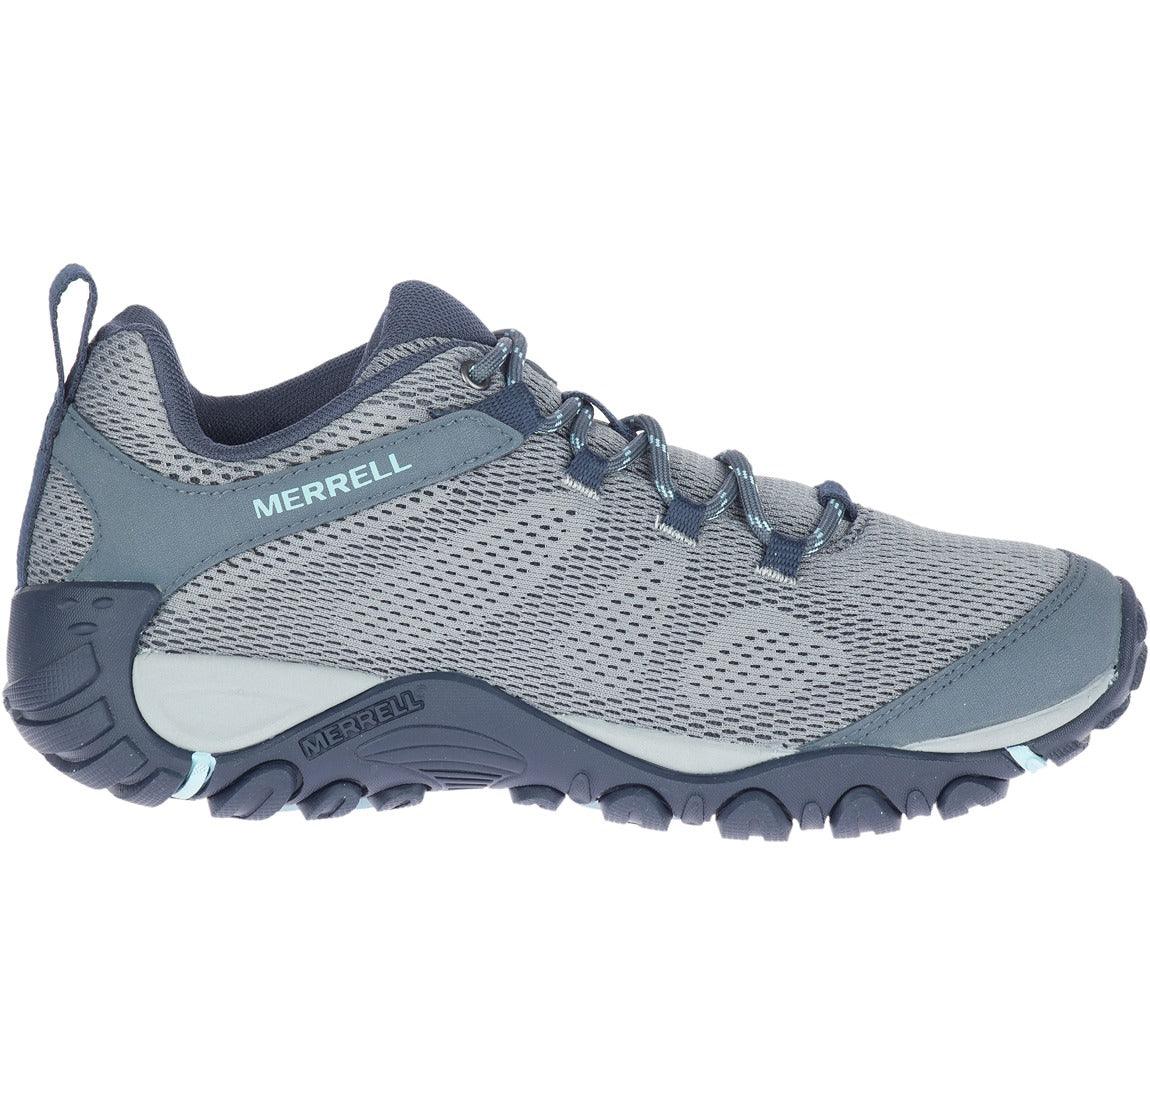 Mesh 5 Carbon Haze Coral Womens Sport Shoes - Get Best Price from